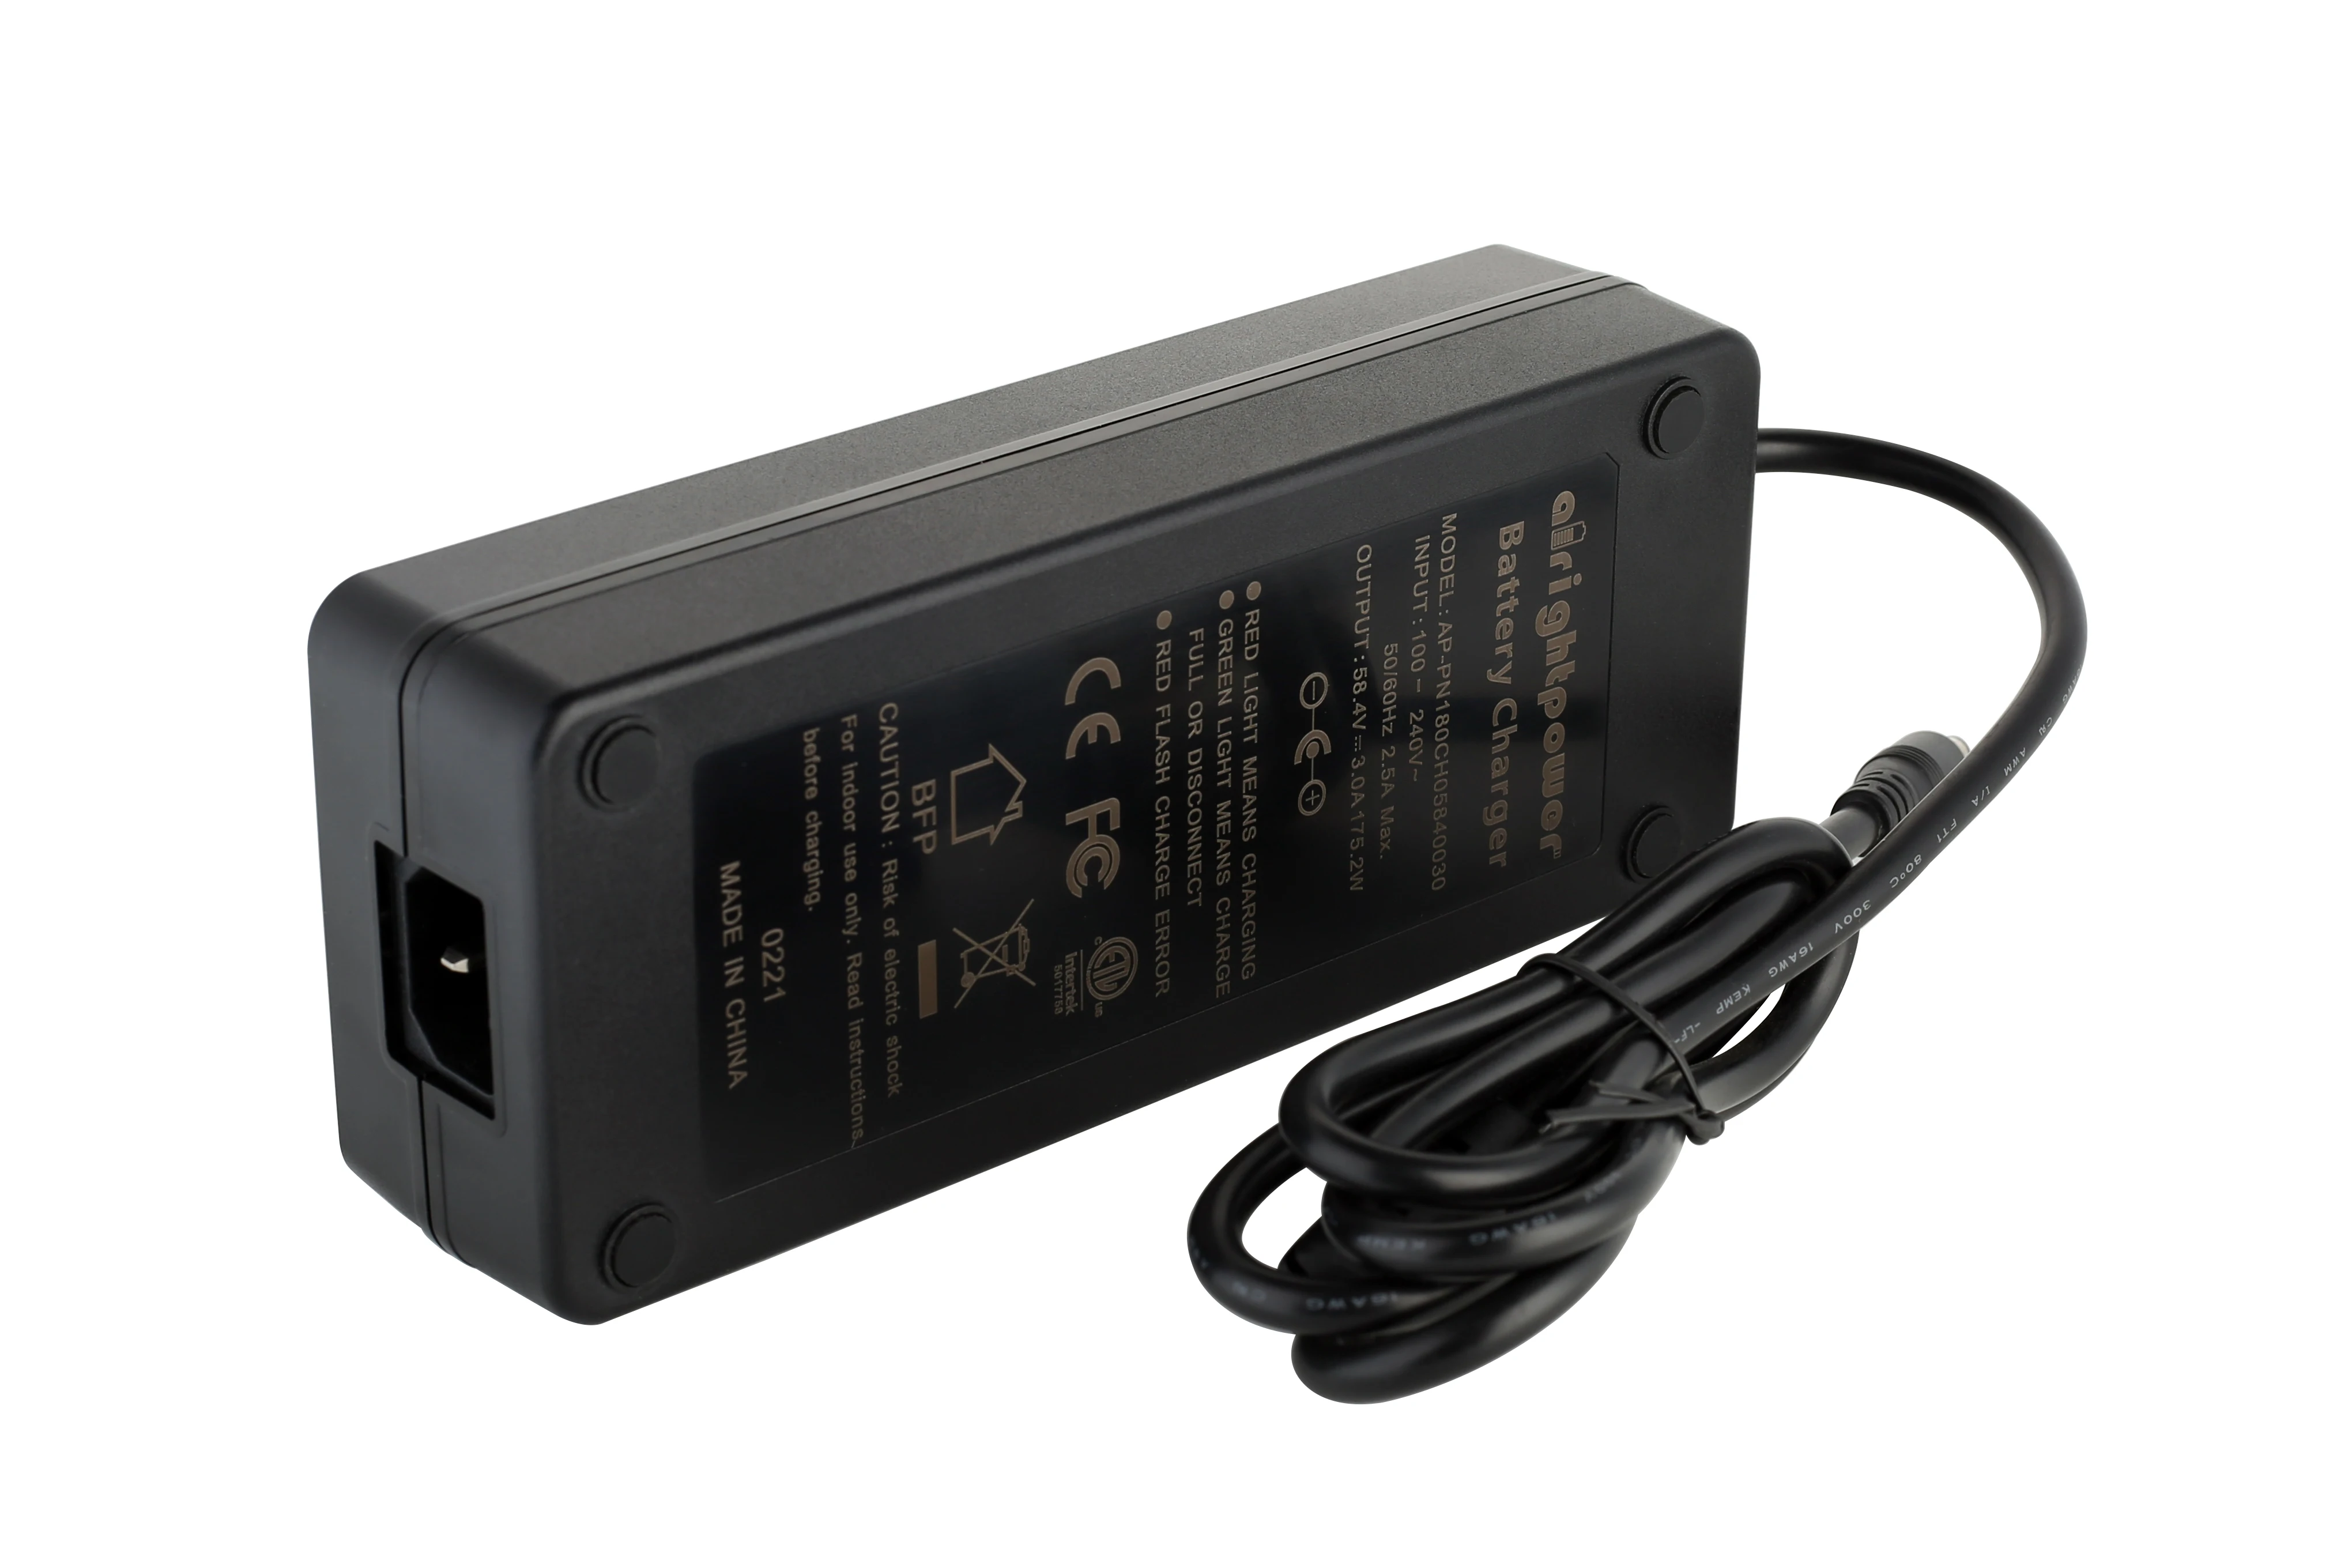 Alrightpower CE GS KC  portable smart battery charger 54.6v3a 42v4a 29.2v6a 16.8v10a 12.6v12a li-ion lead acid battery charger